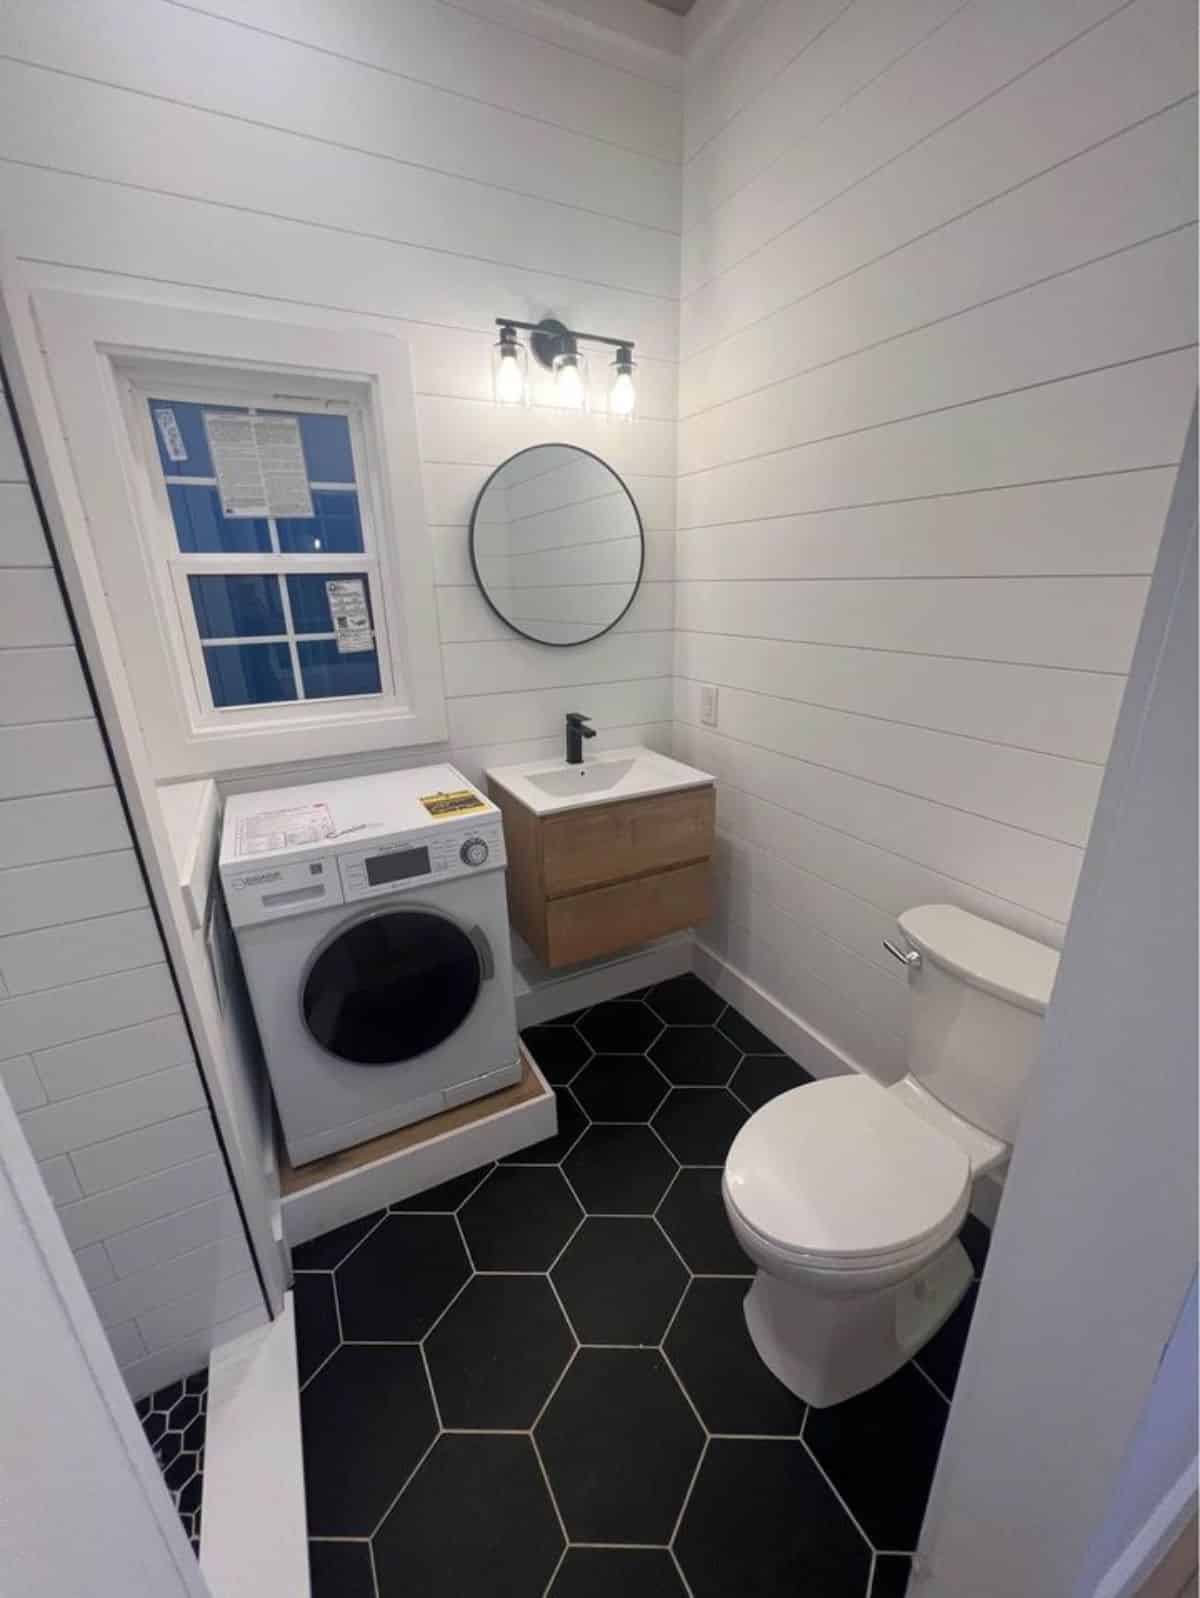 bathroom of brand new 36’ tiny house has all the standard fittings and washer dryer